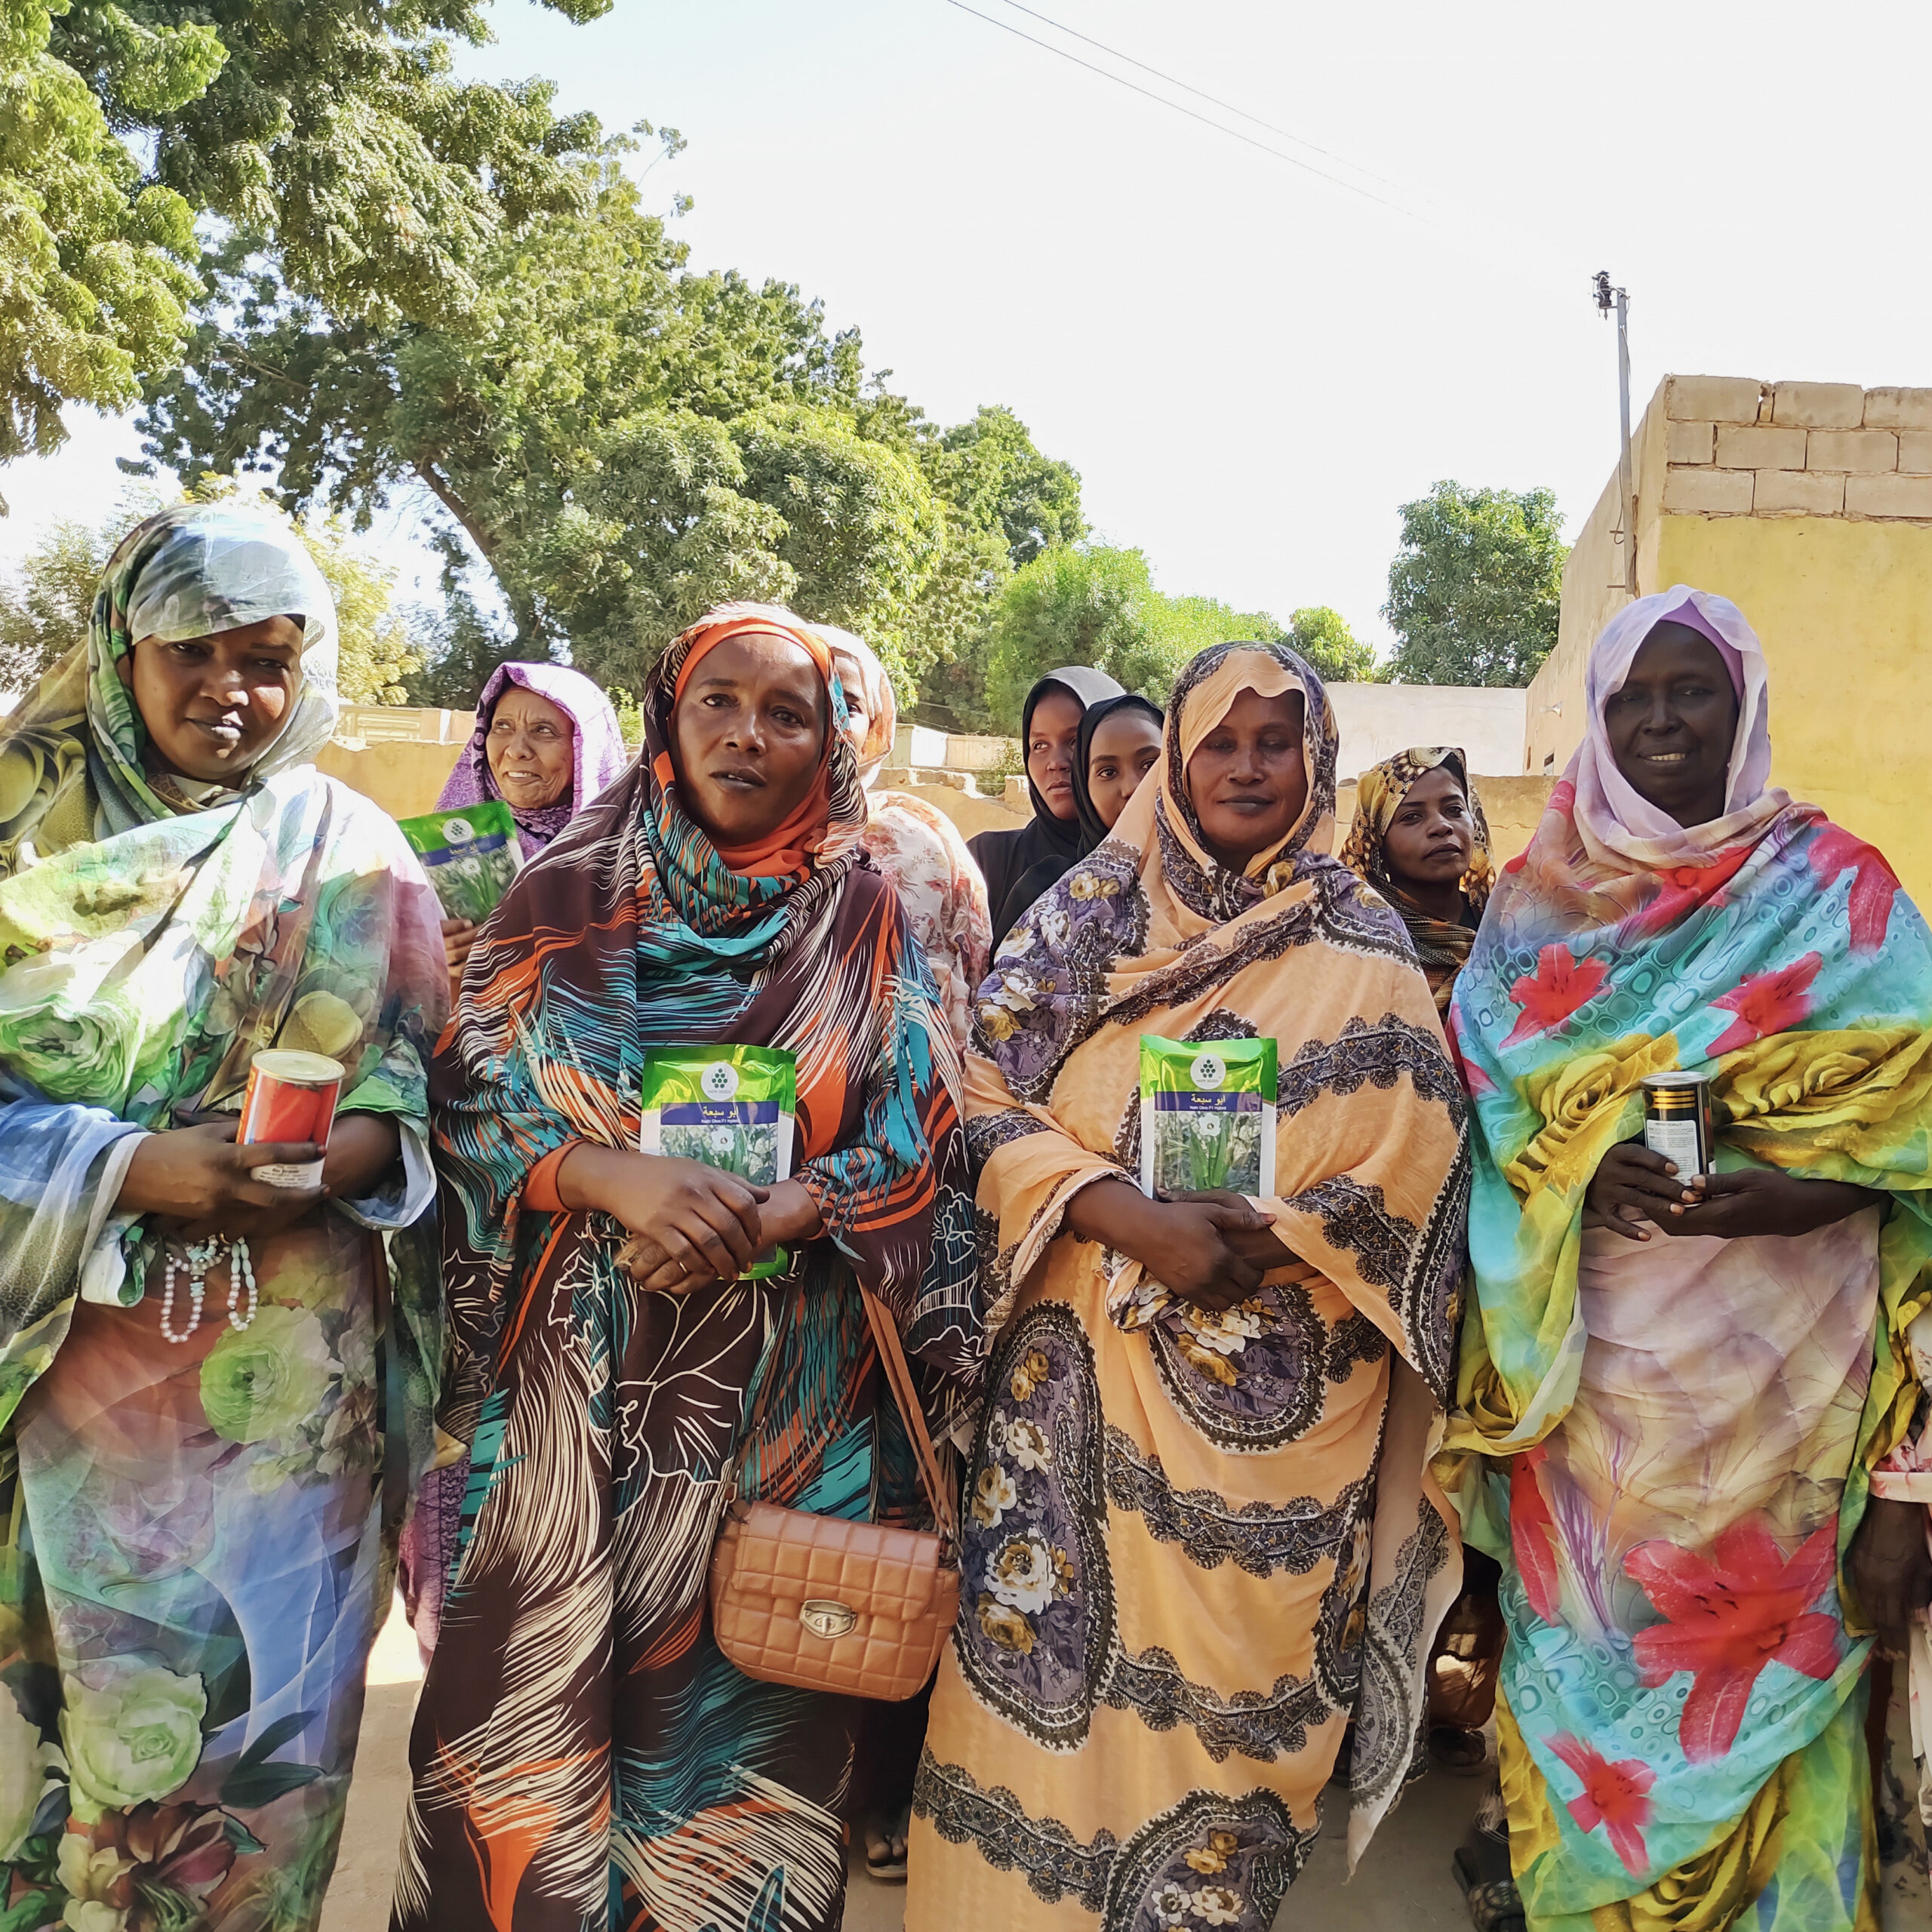 A group of women in colorful traditional attire holding boxes of aid supplies, standing outdoors under clear skies.